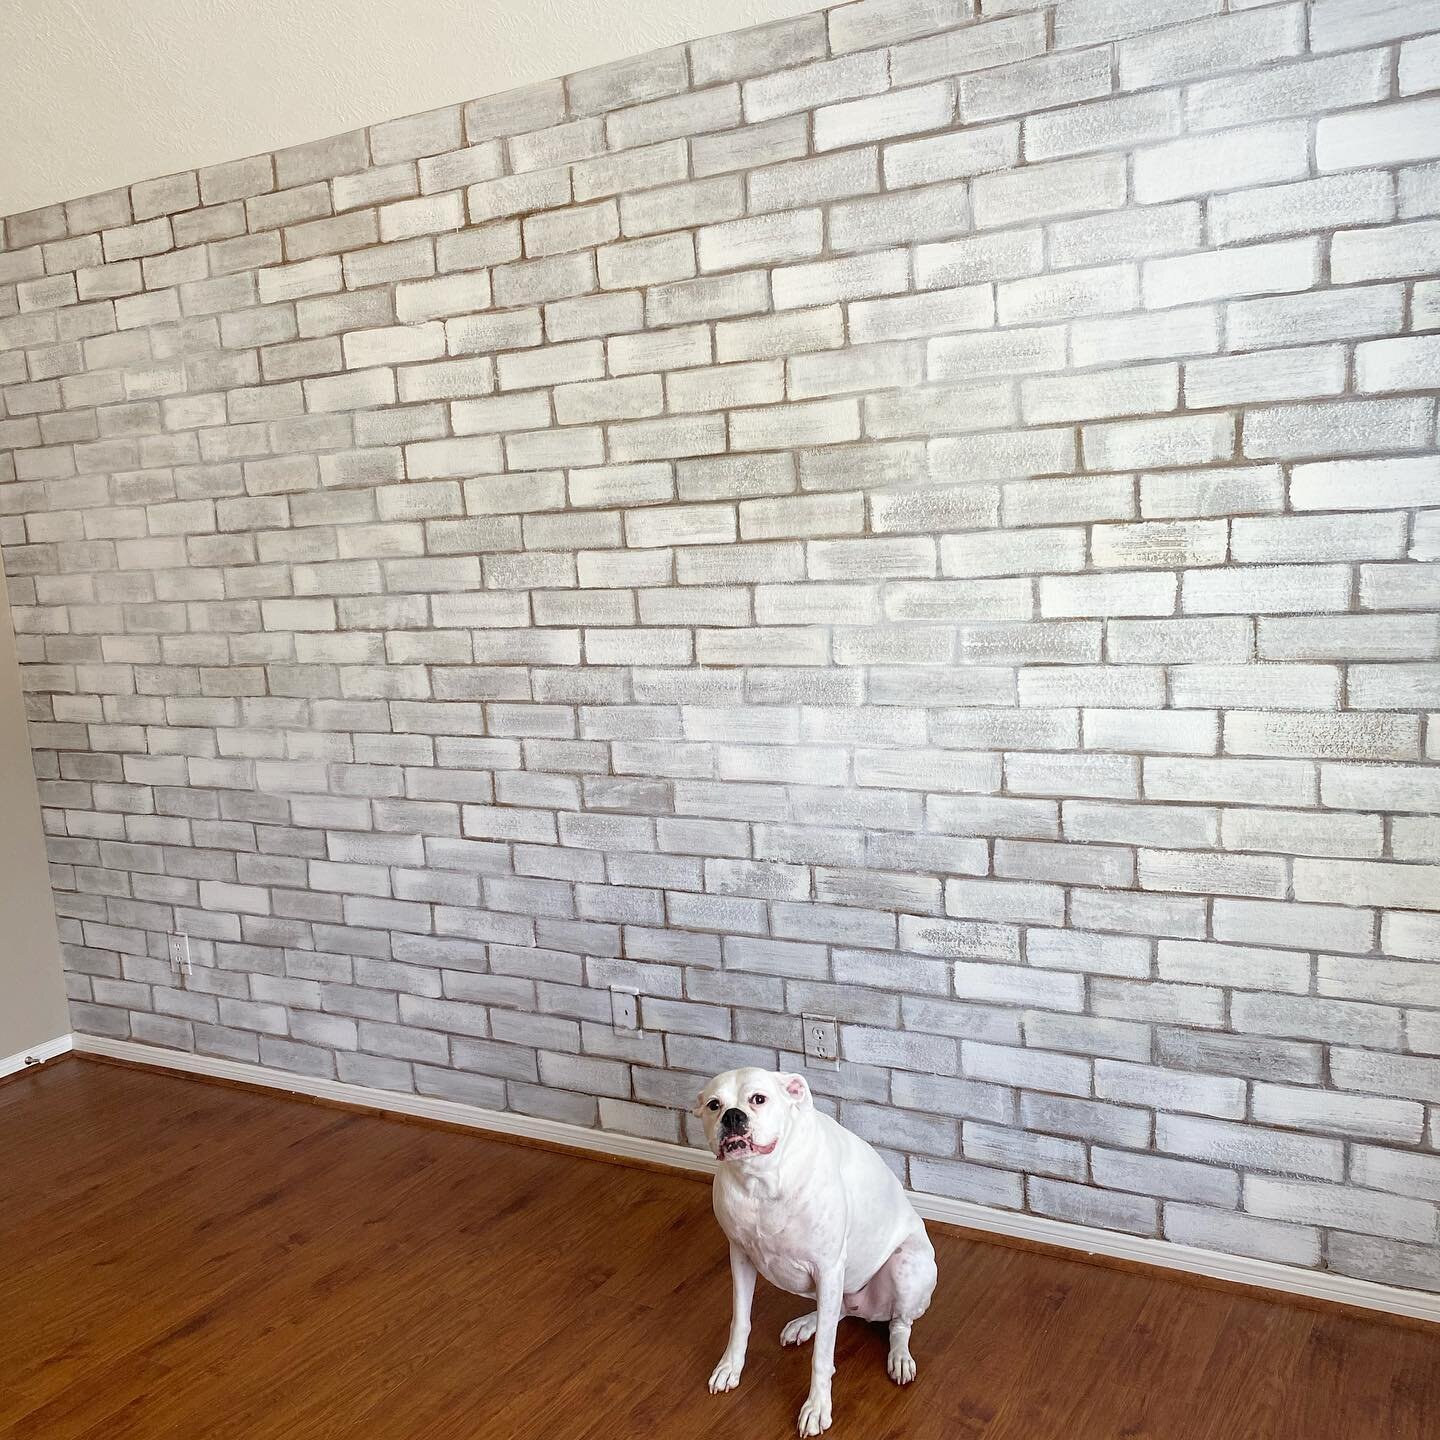 Faux white washed brick wall is finished and Zoey approves! #fauxbrick #brickwall #nursery #nurserydecor #localartist #mural #accentwall #interiordesign